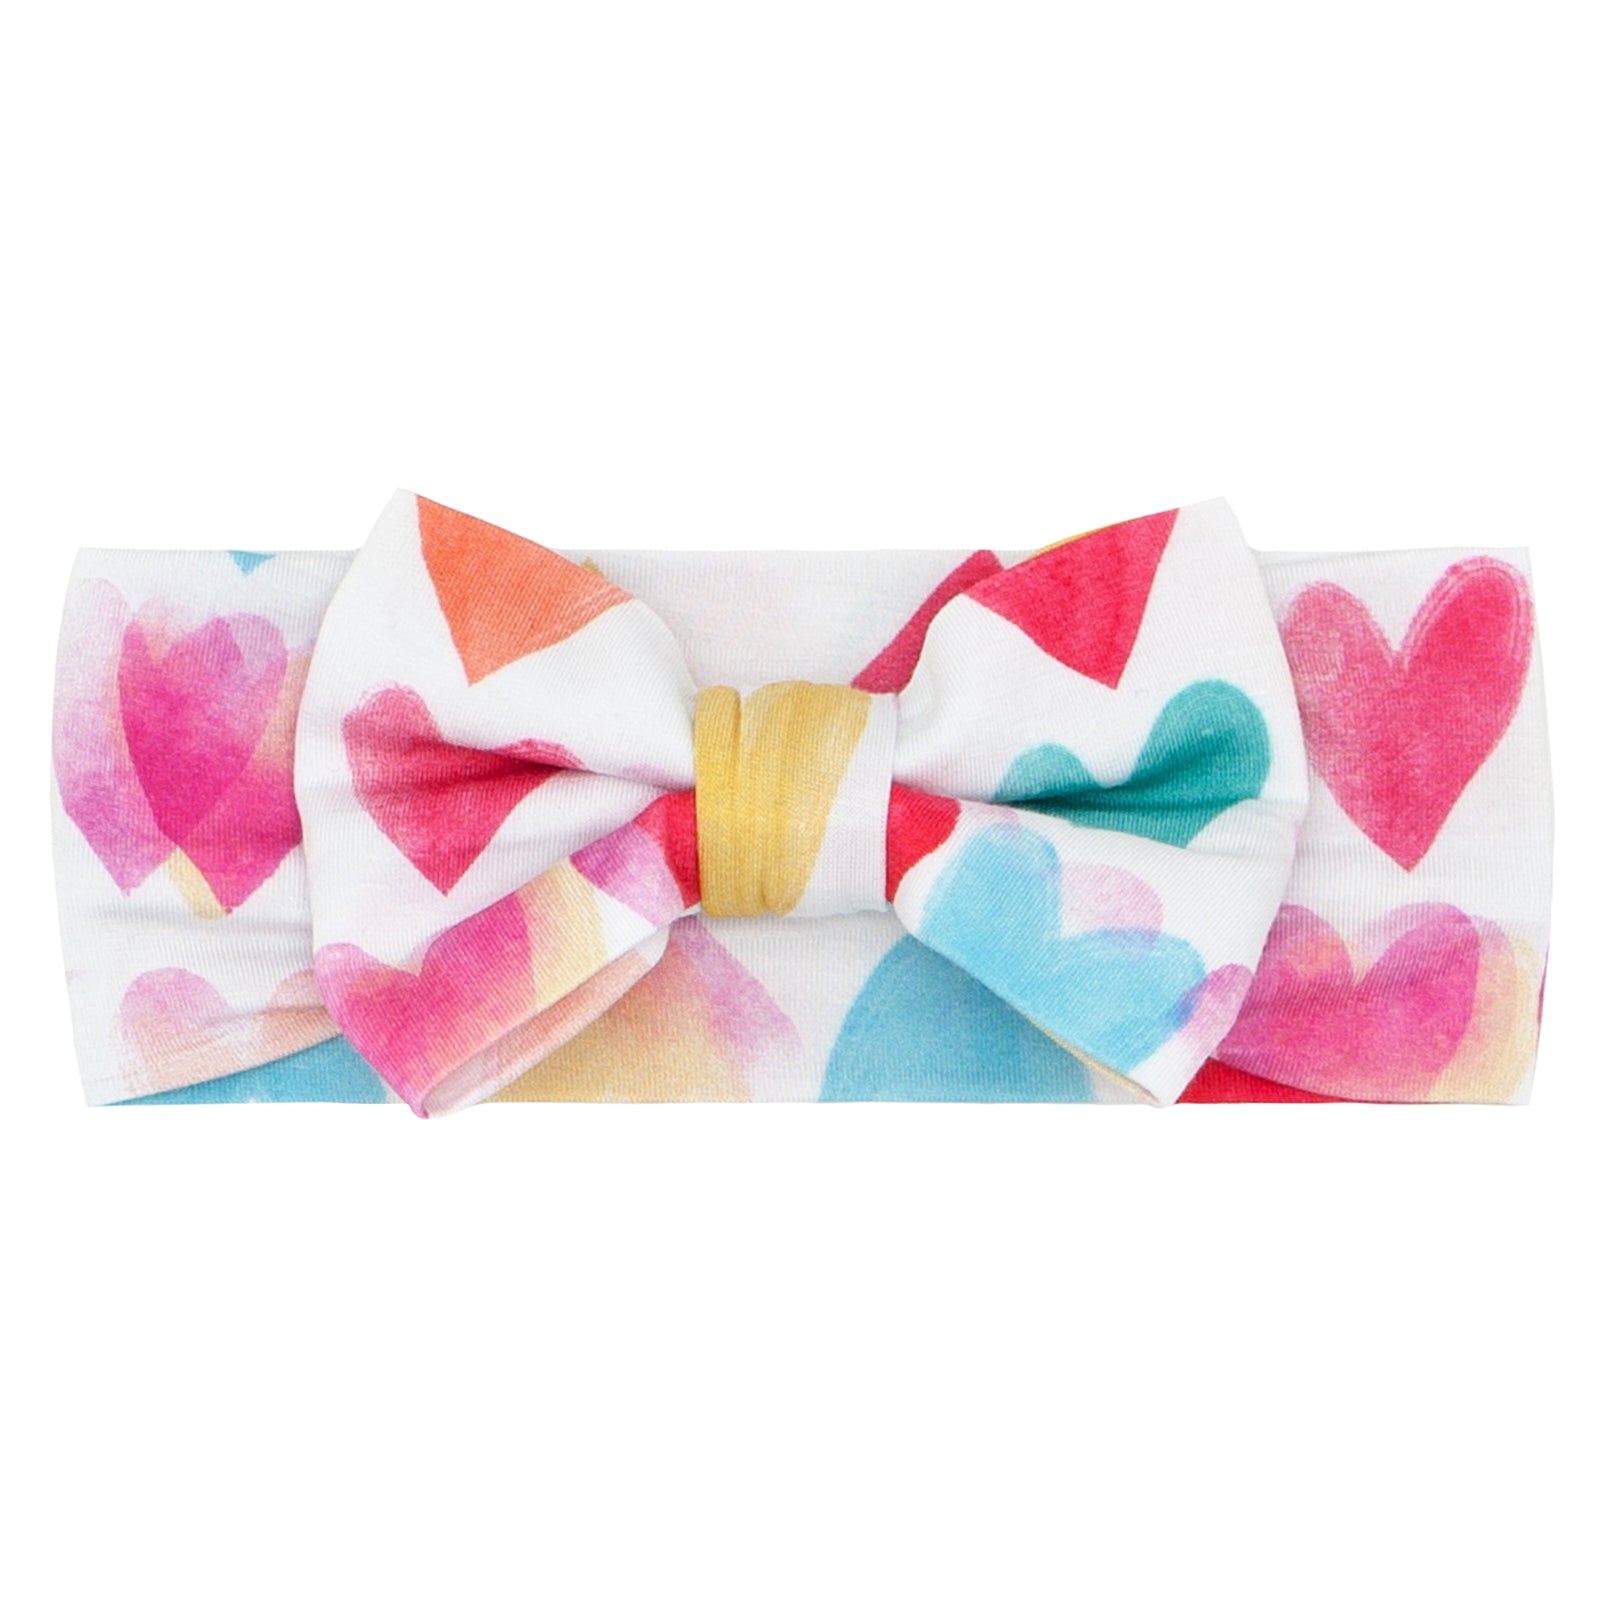 Flat lay image of a Watercolor Love luxe bow headband